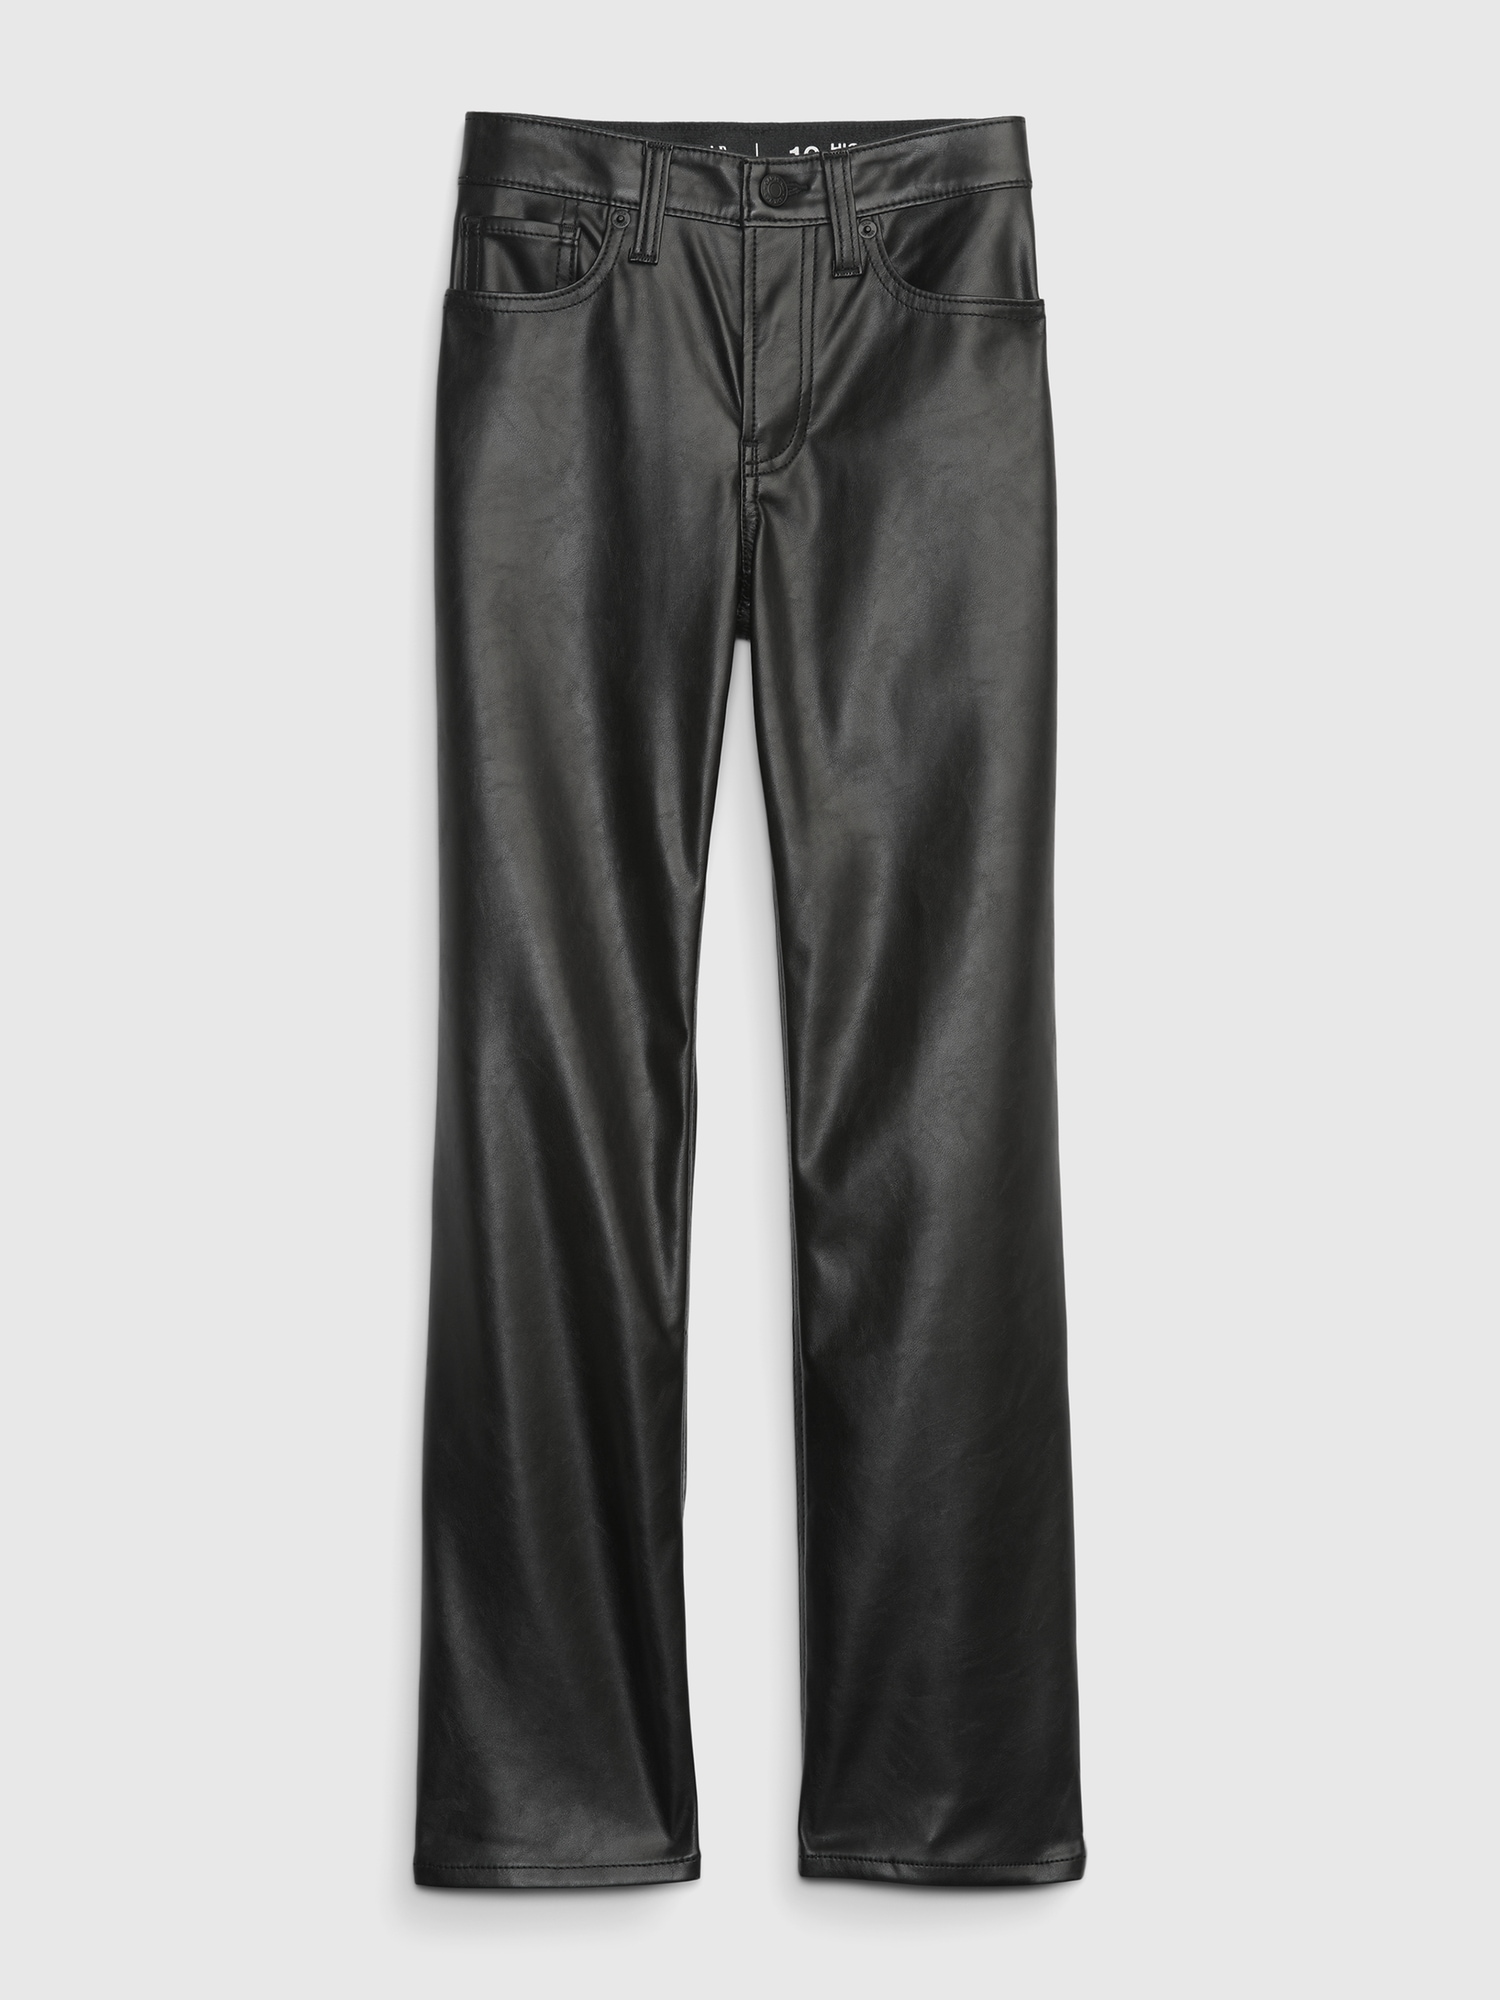 Gap Black High Waisted Slim Faux-Leather Trousers